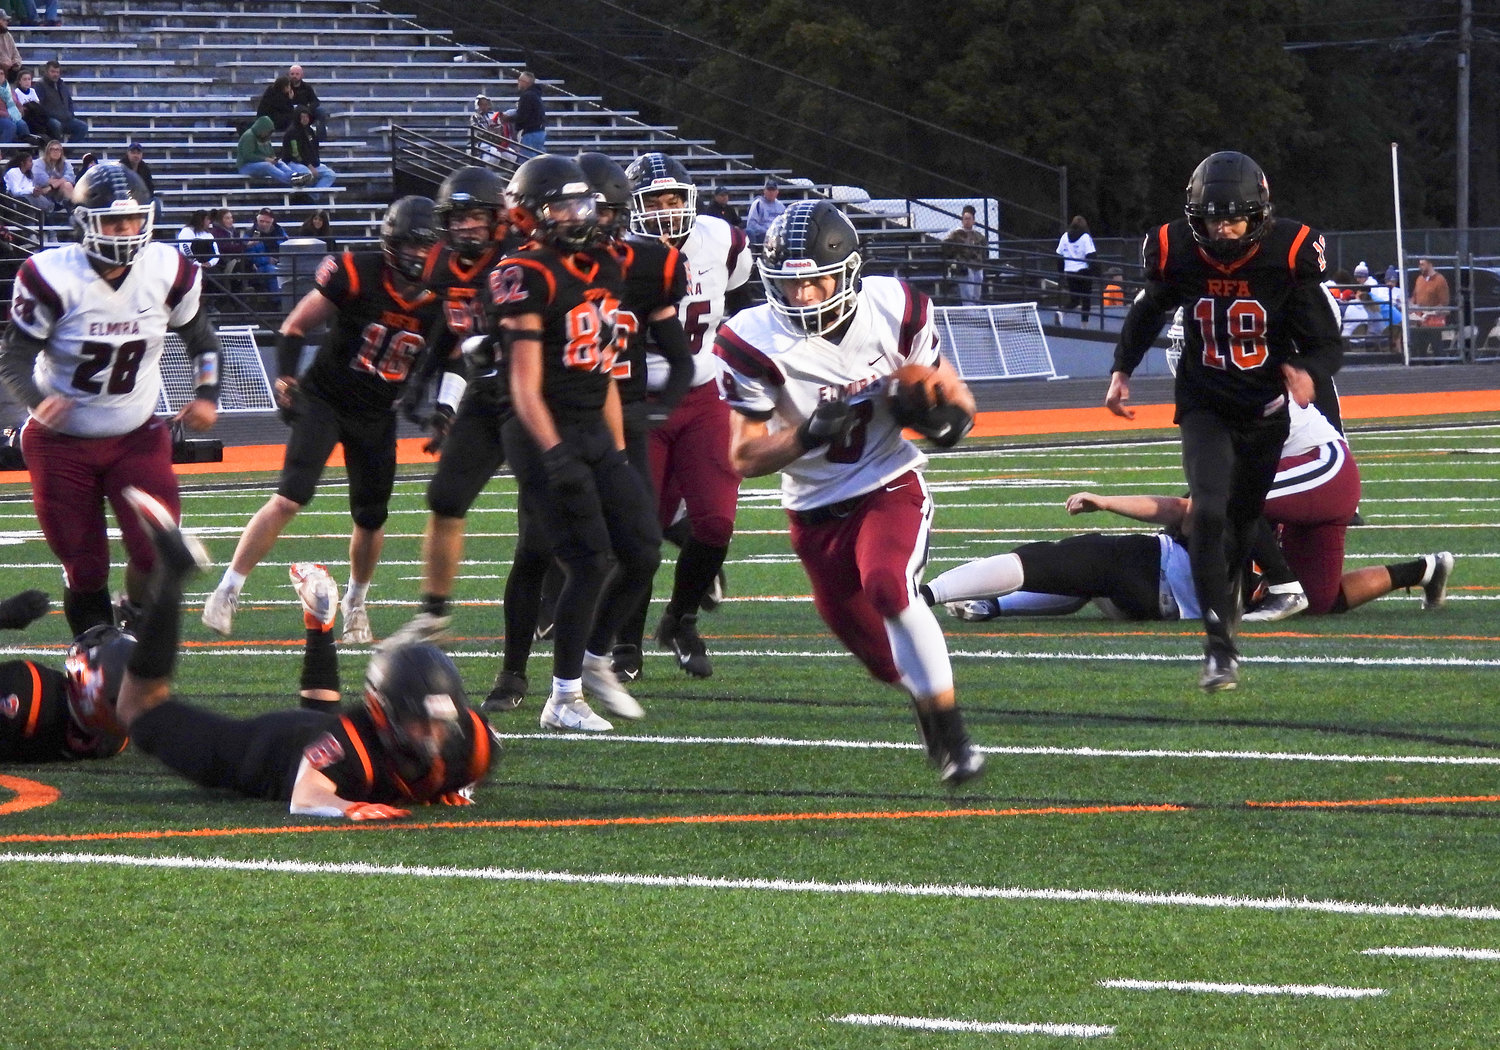 Elmira running back Brady Keefe heads for the end zone in the first half of the team's 62-28 win at RFA Stadium Friday night. Keefe ran wild in the game, going for 173 yards and scoring three times.